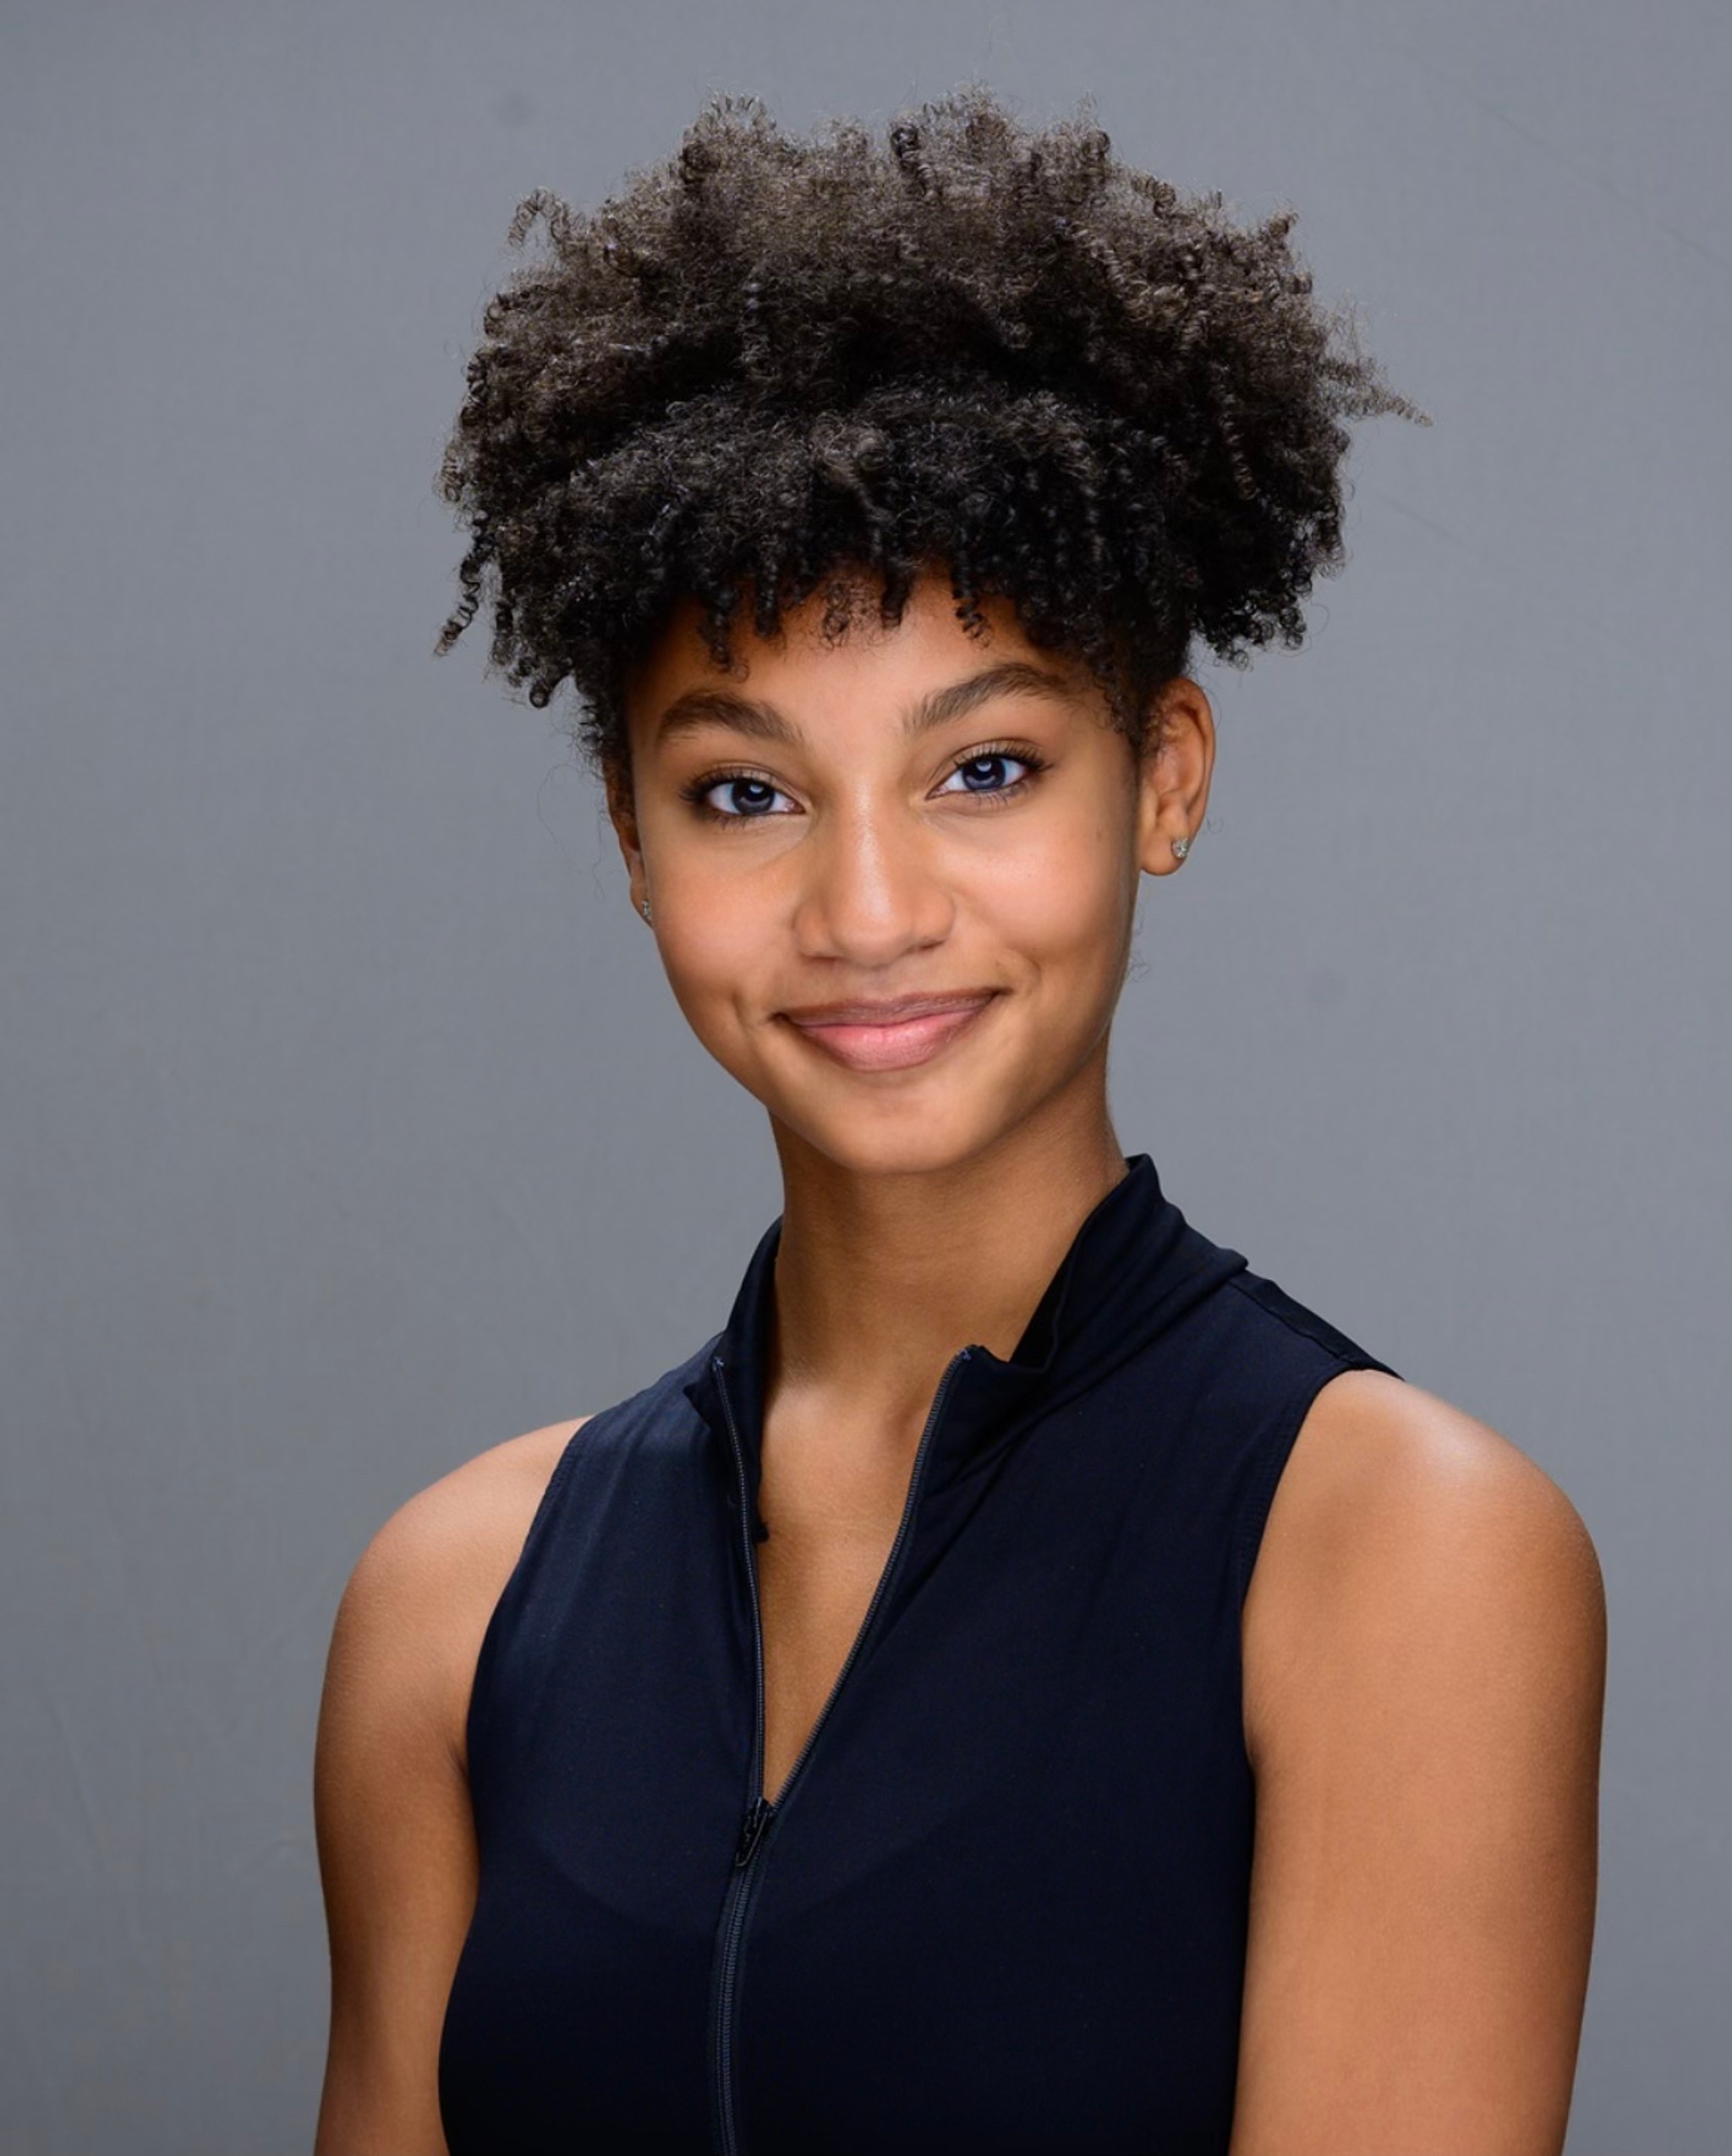 A portrait of dancer Amya Fortunato, a Black person who has curly dark hair pulled back above her head. She has light brown skin and smiles with eyebrows raised at us. She wears a blue sleeveless blouse with a high collar. 